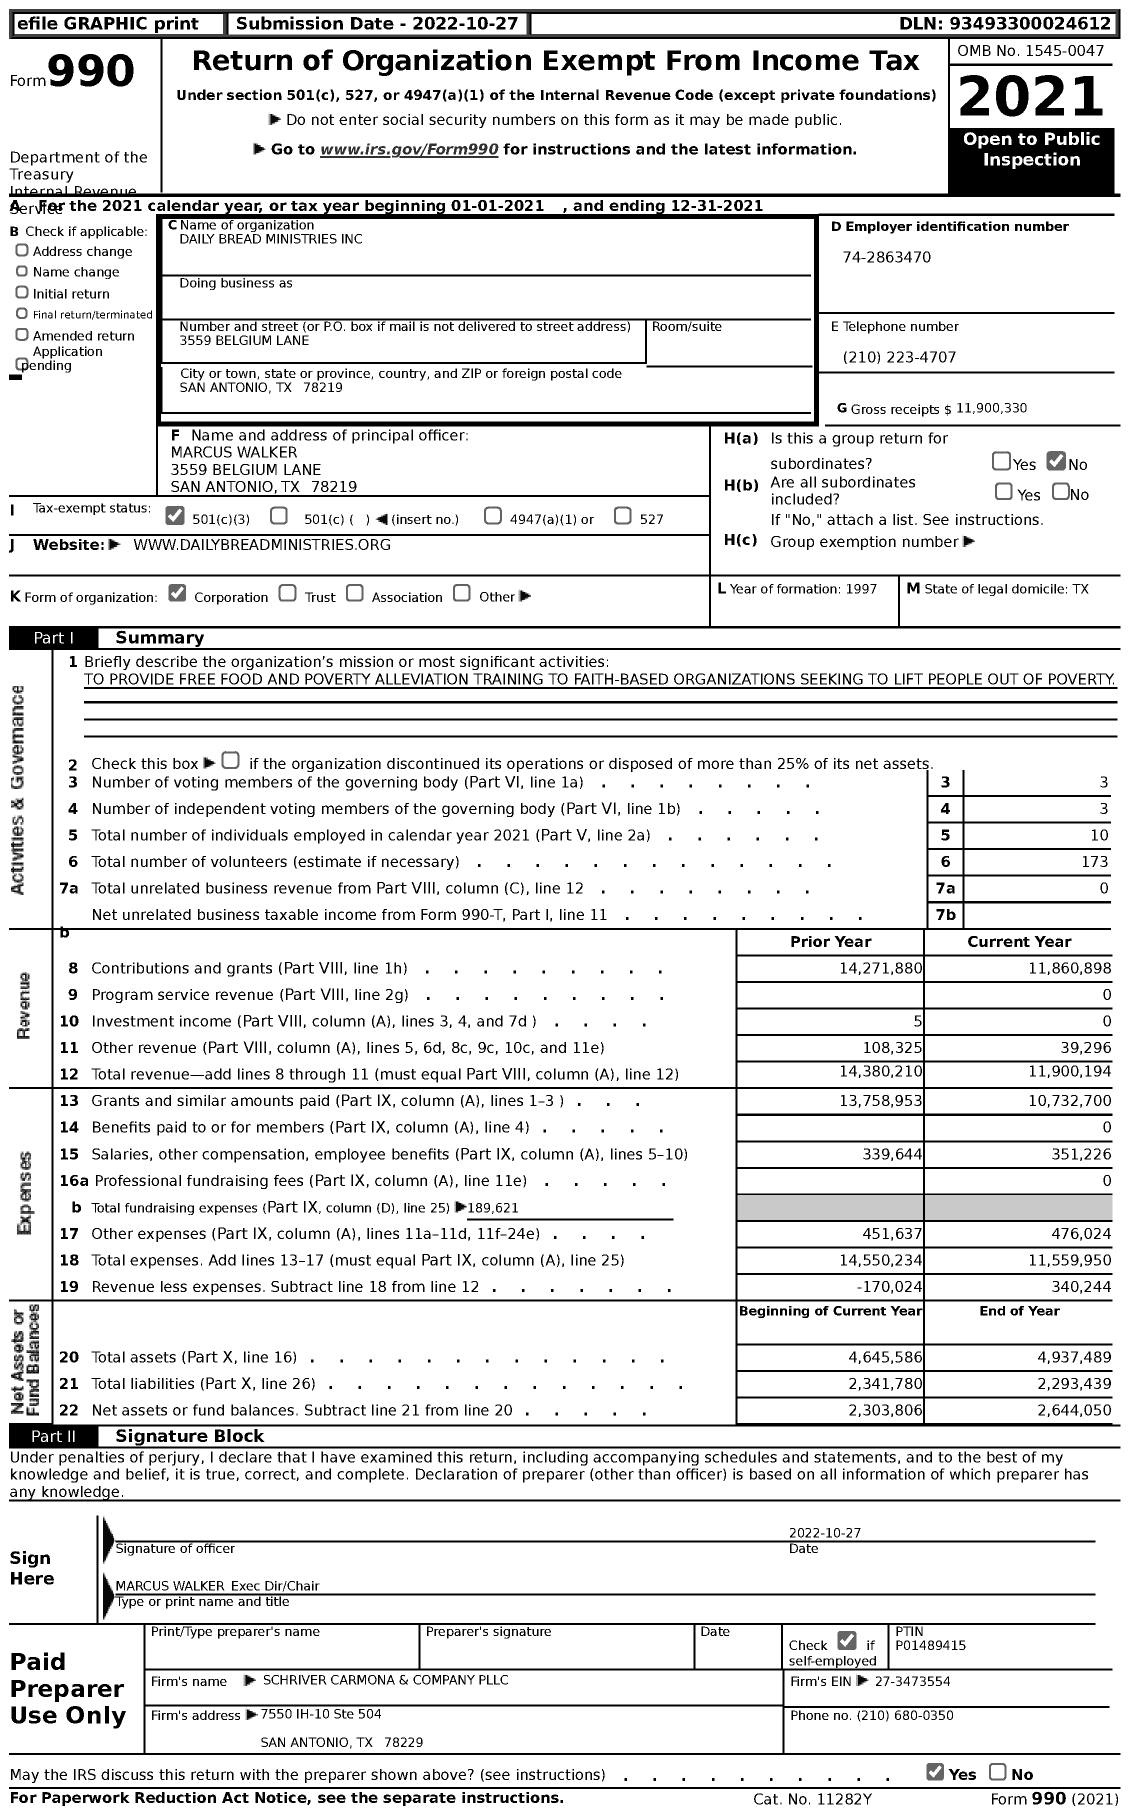 Image of first page of 2021 Form 990 for Daily Bread Ministries (DBM)